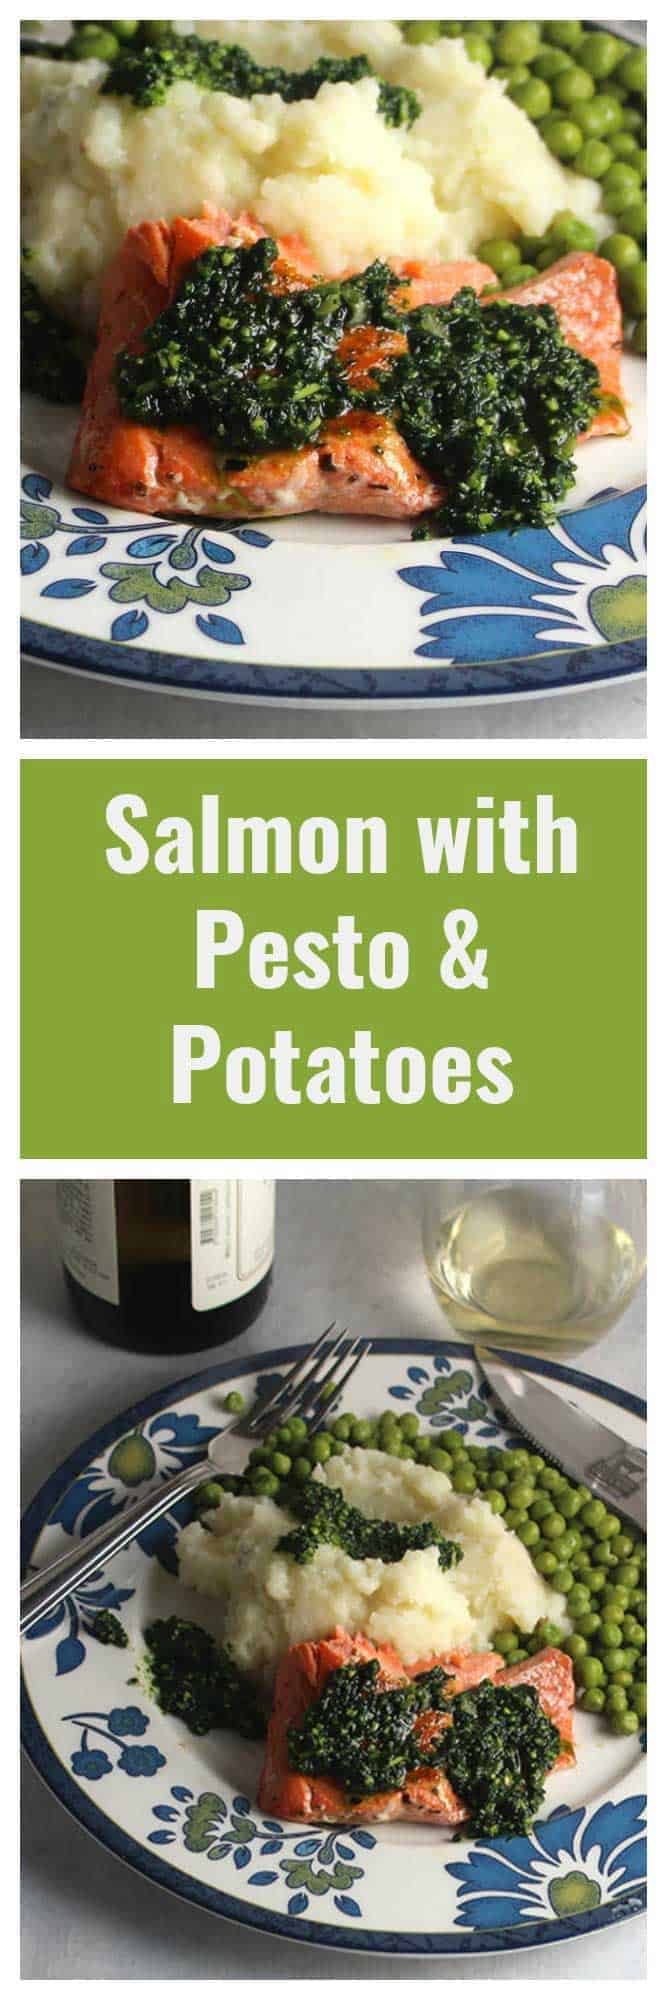 Two images of salmon with pesto, potatoes and peas served on a plate.